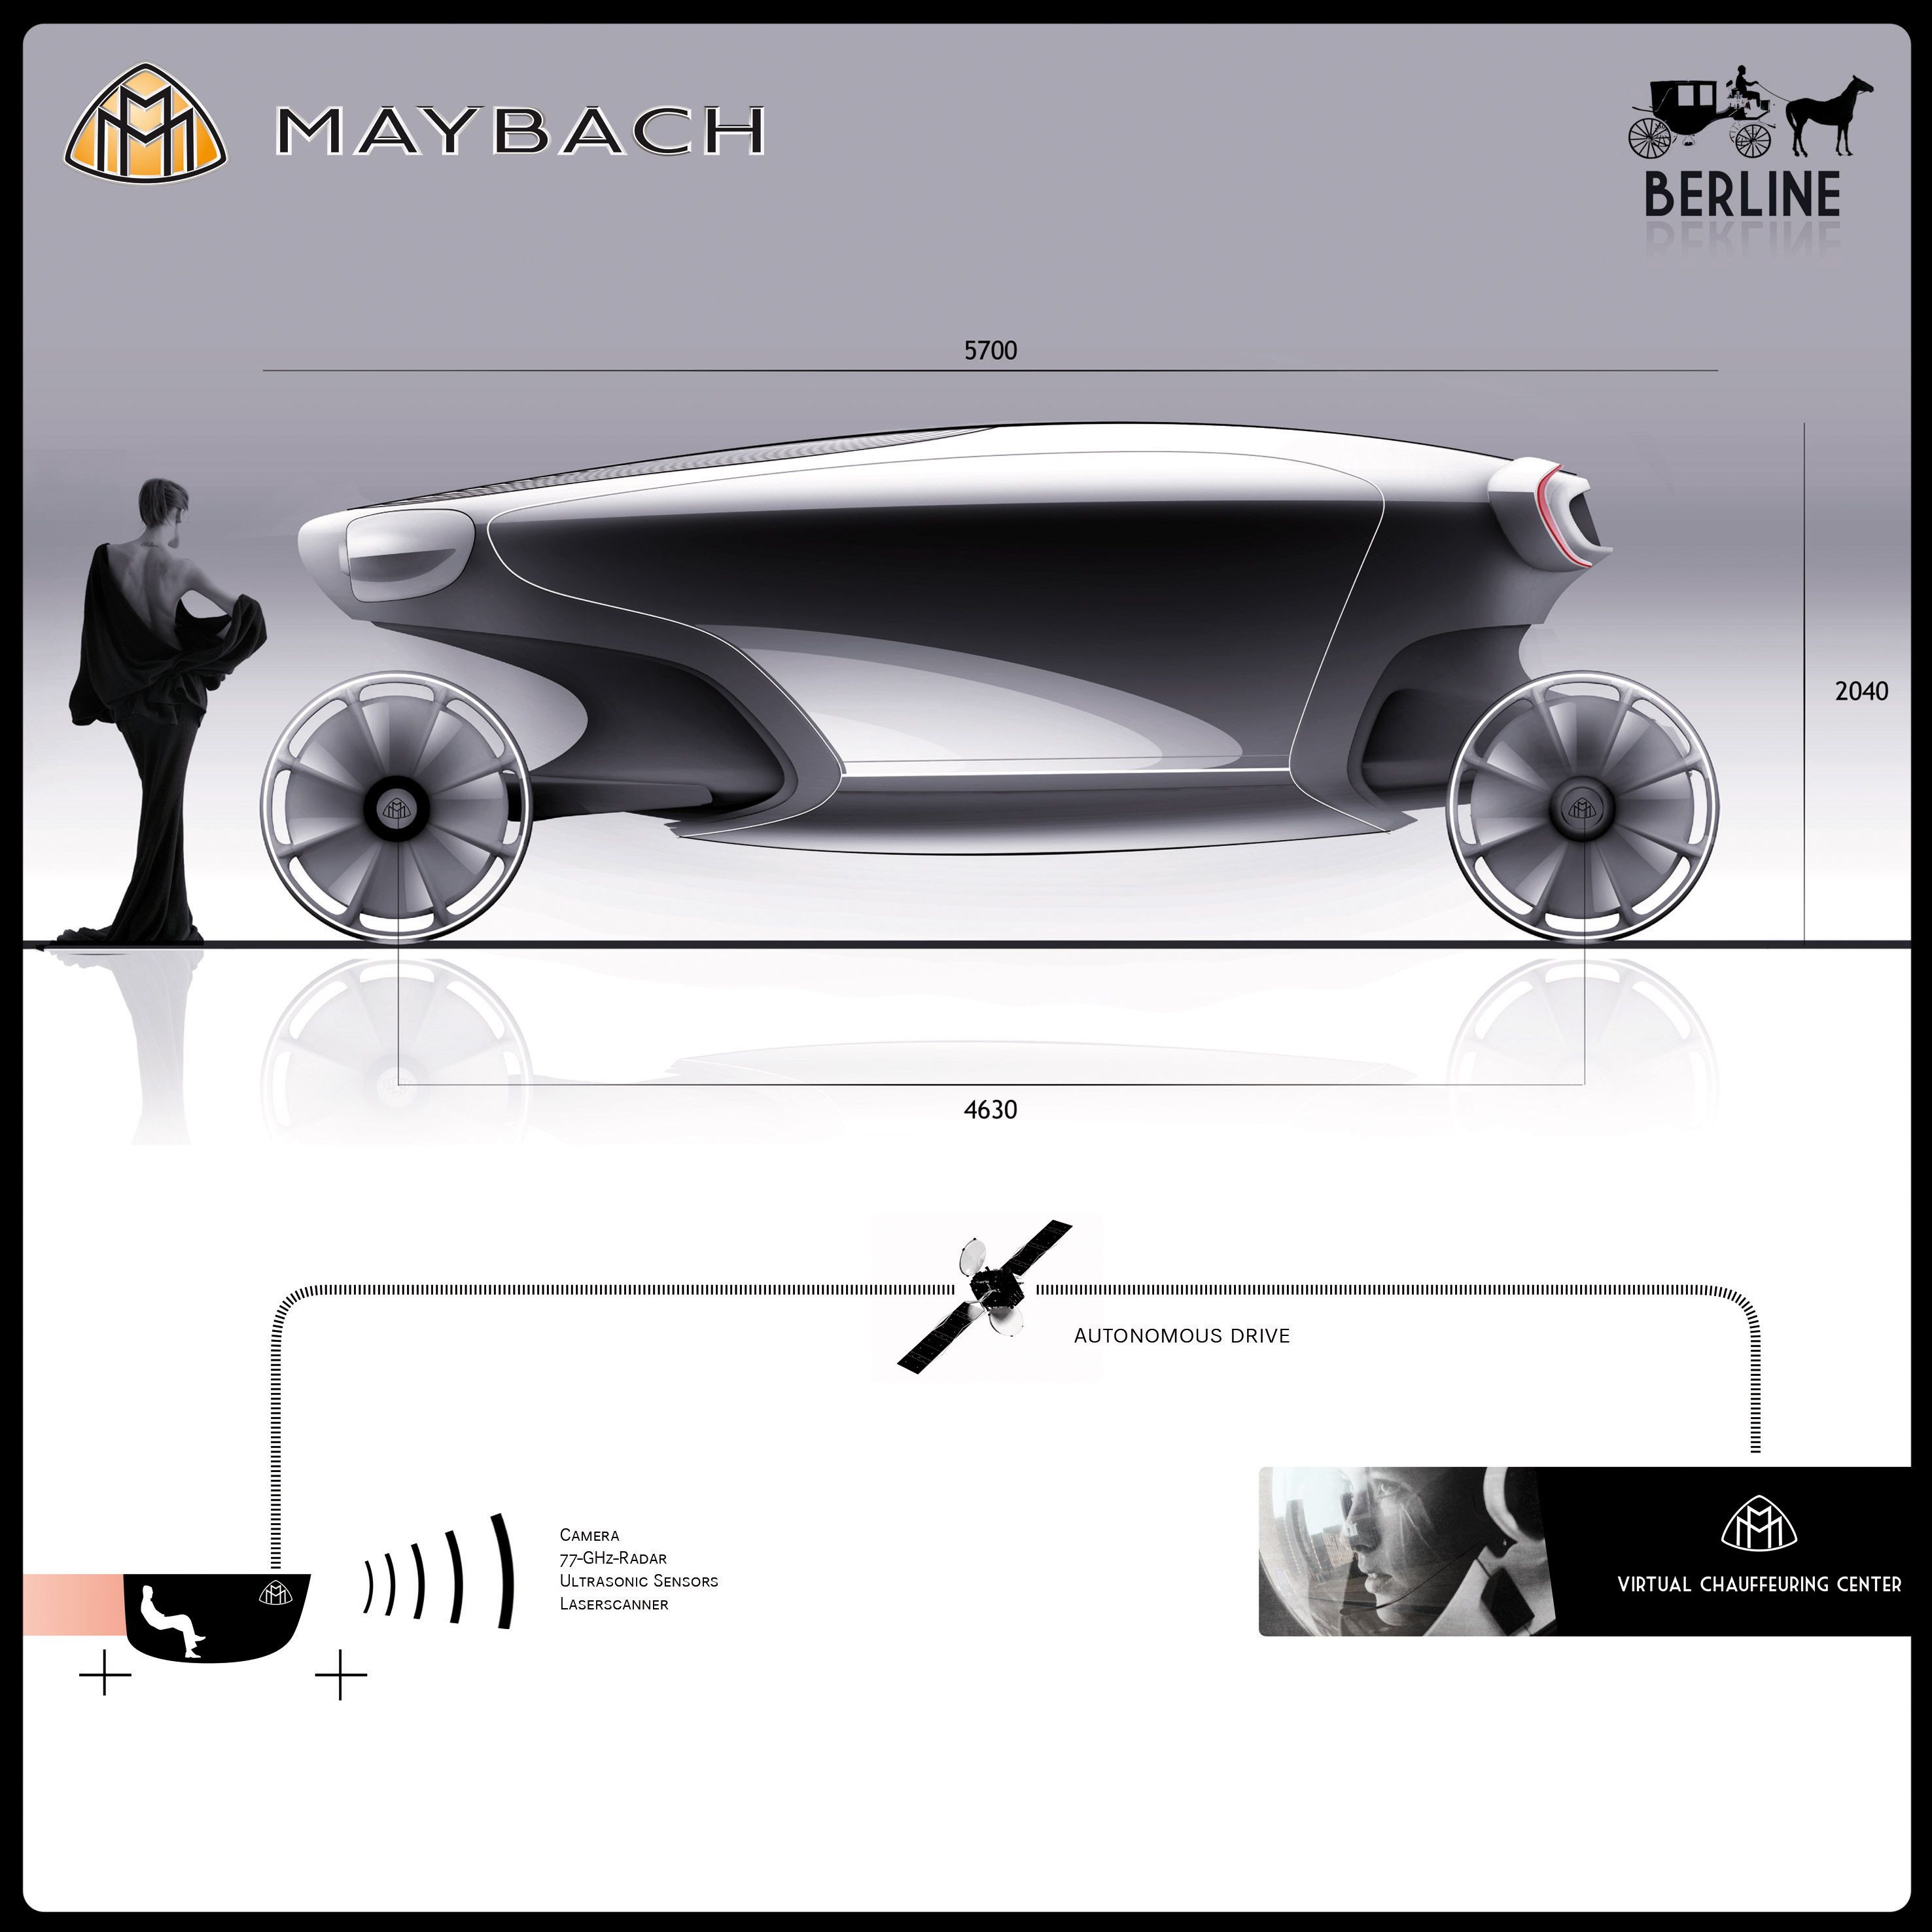 2011 Maybach Berline Carriage: 